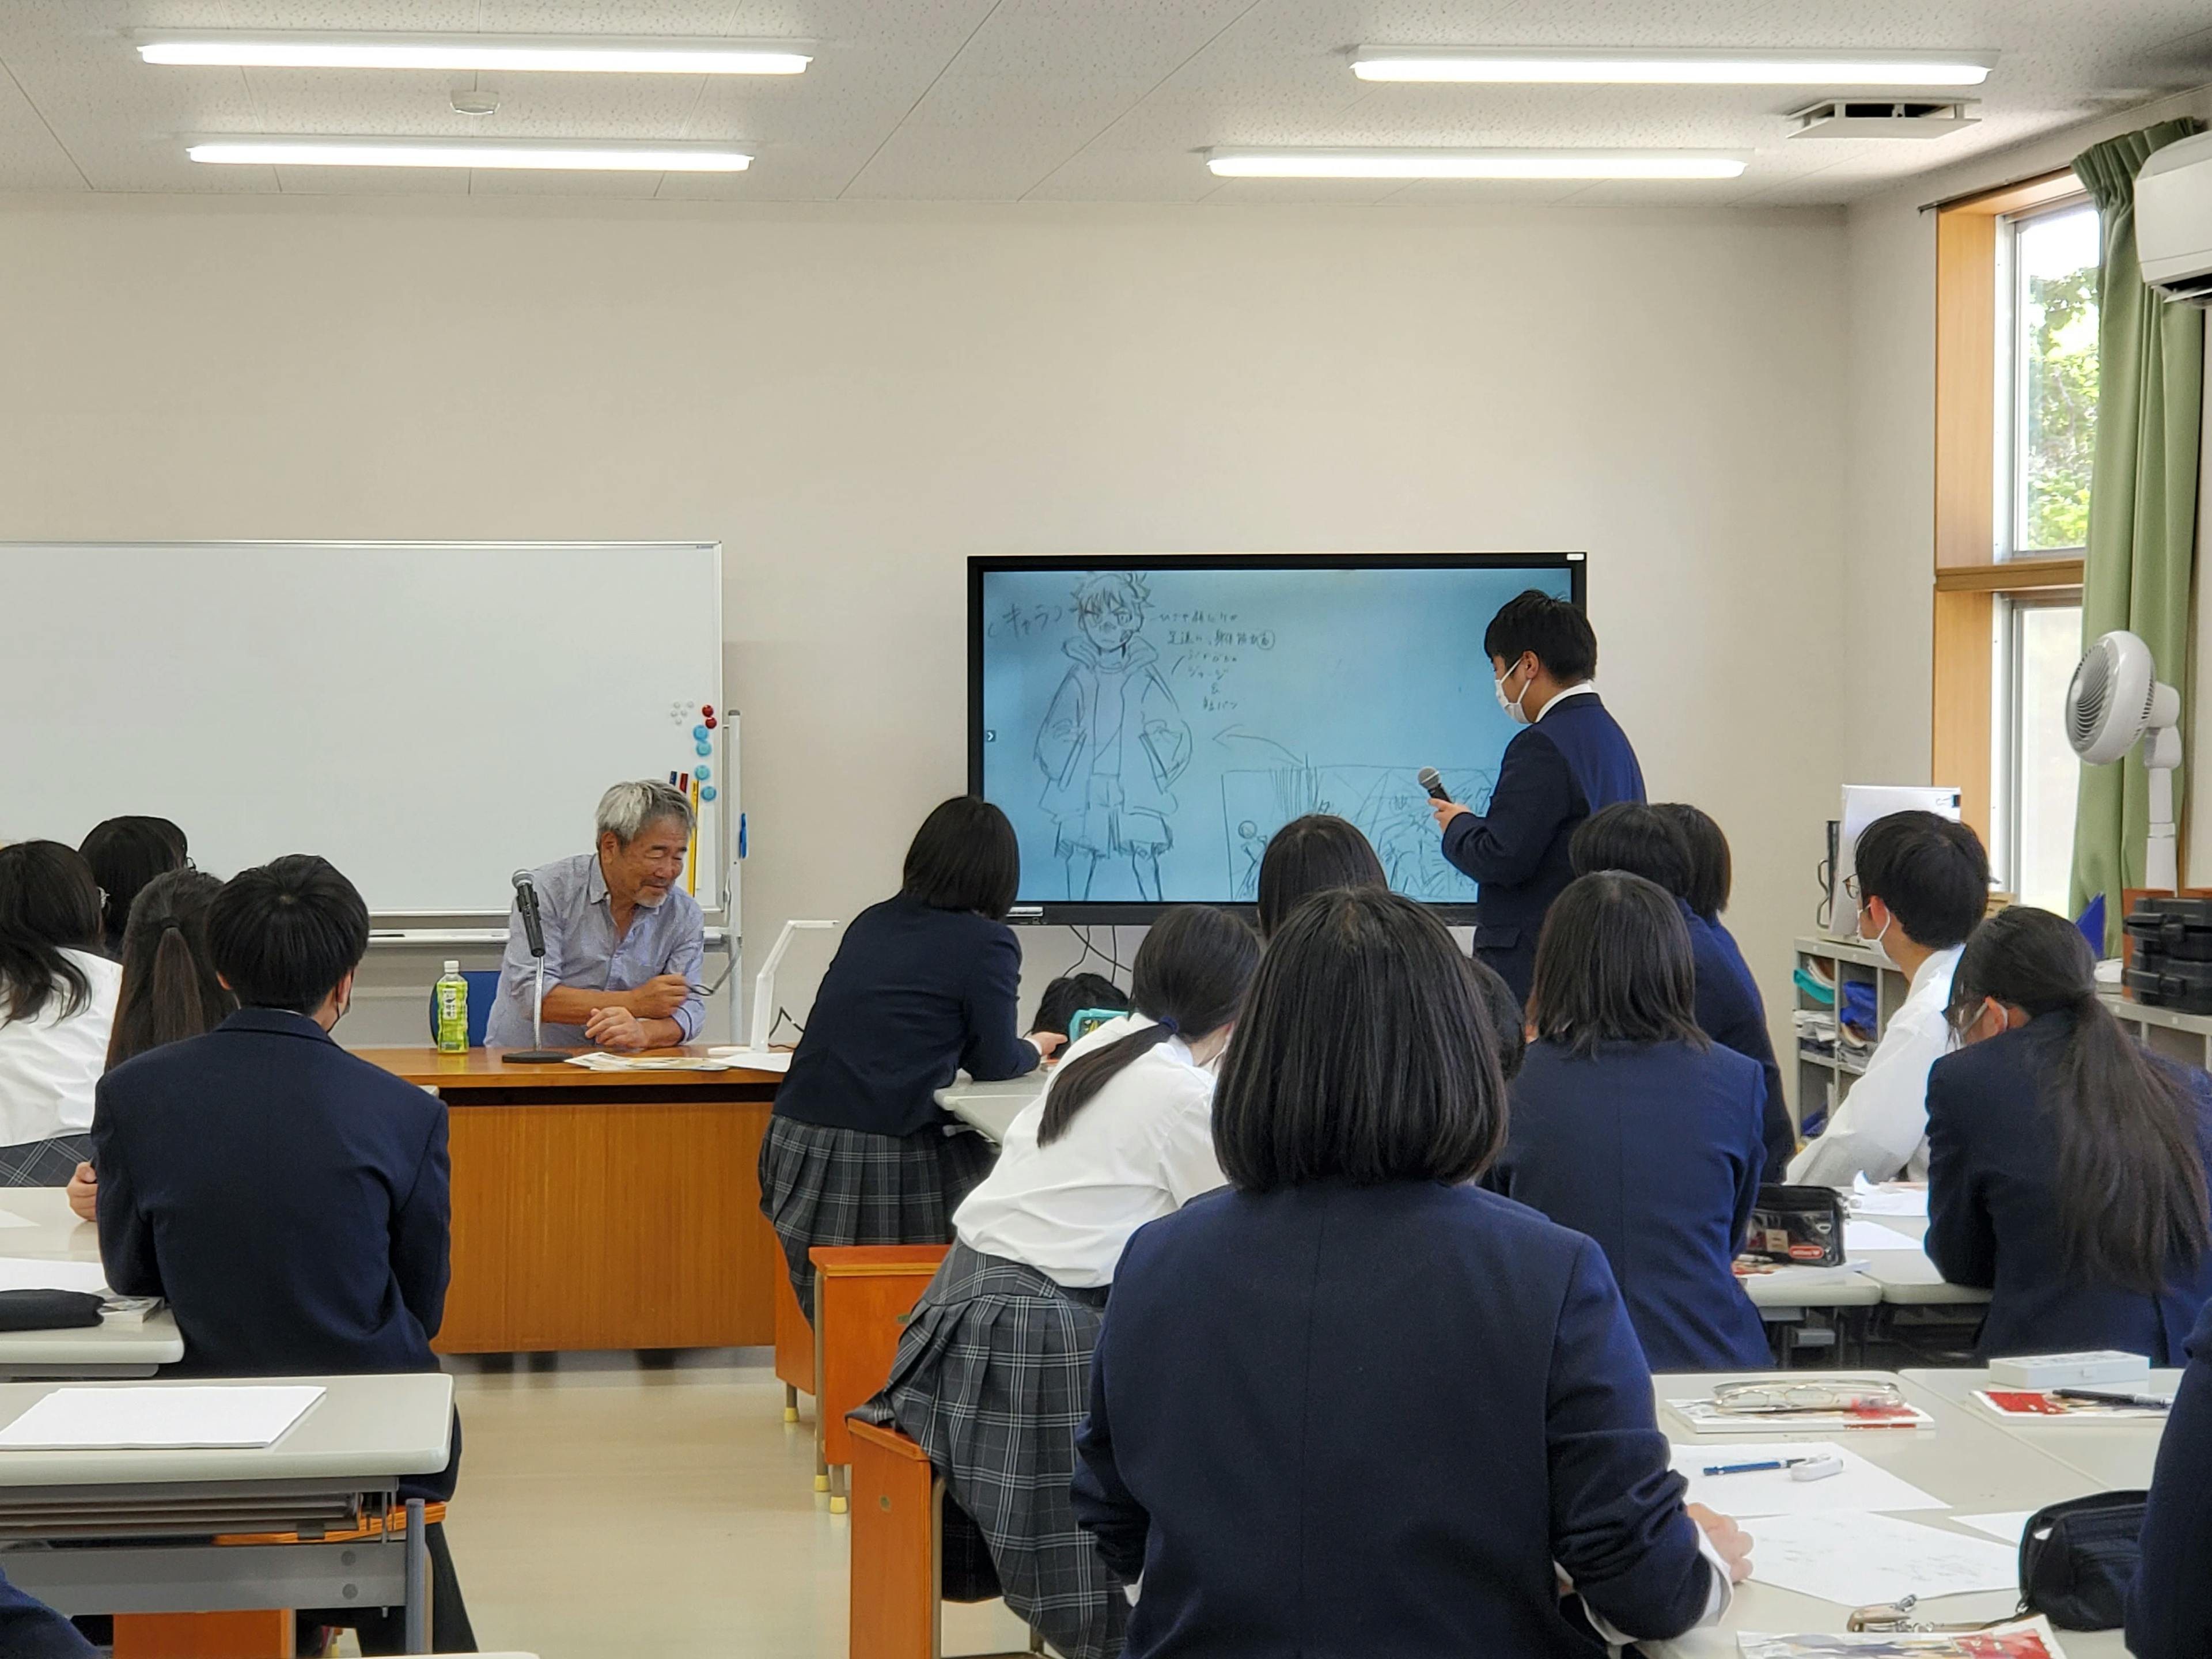 An article about the Takamori High School Manga Department was published in the Nikkei Shimbun.